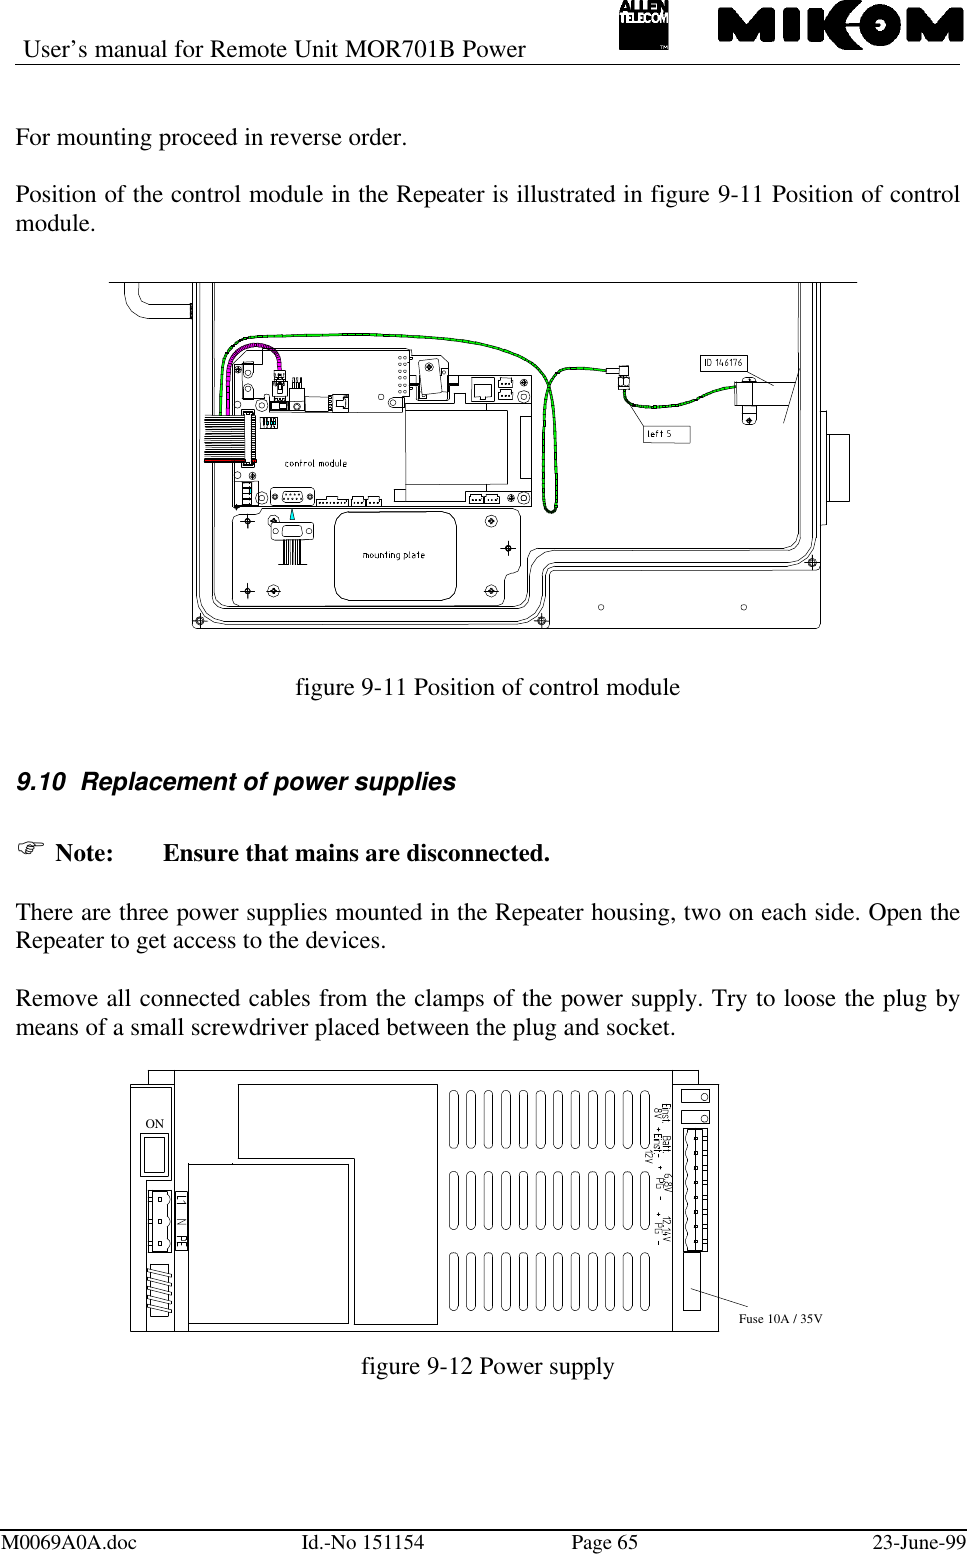 User’s manual for Remote Unit MOR701B PowerM0069A0A.doc Id.-No 151154 Page 65 23-June-99For mounting proceed in reverse order.Position of the control module in the Repeater is illustrated in figure 9-11 Position of controlmodule.figure 9-11 Position of control module9.10 Replacement of power suppliesF Note: Ensure that mains are disconnected.There are three power supplies mounted in the Repeater housing, two on each side. Open theRepeater to get access to the devices.Remove all connected cables from the clamps of the power supply. Try to loose the plug bymeans of a small screwdriver placed between the plug and socket.ONFuse 10A / 35Vfigure 9-12 Power supply